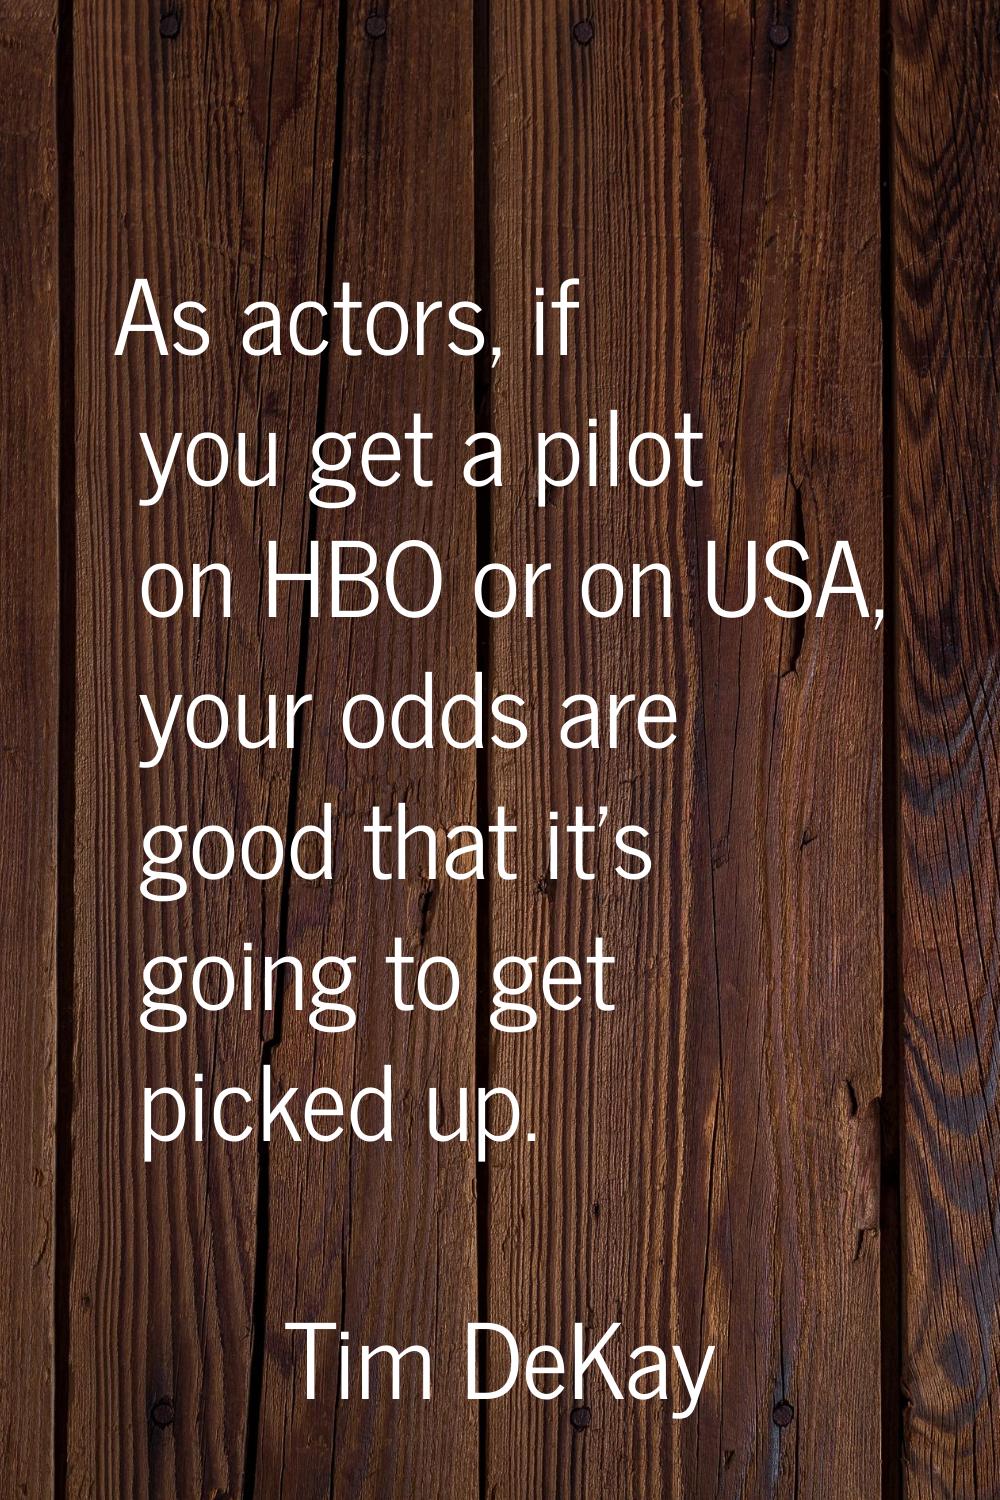 As actors, if you get a pilot on HBO or on USA, your odds are good that it's going to get picked up